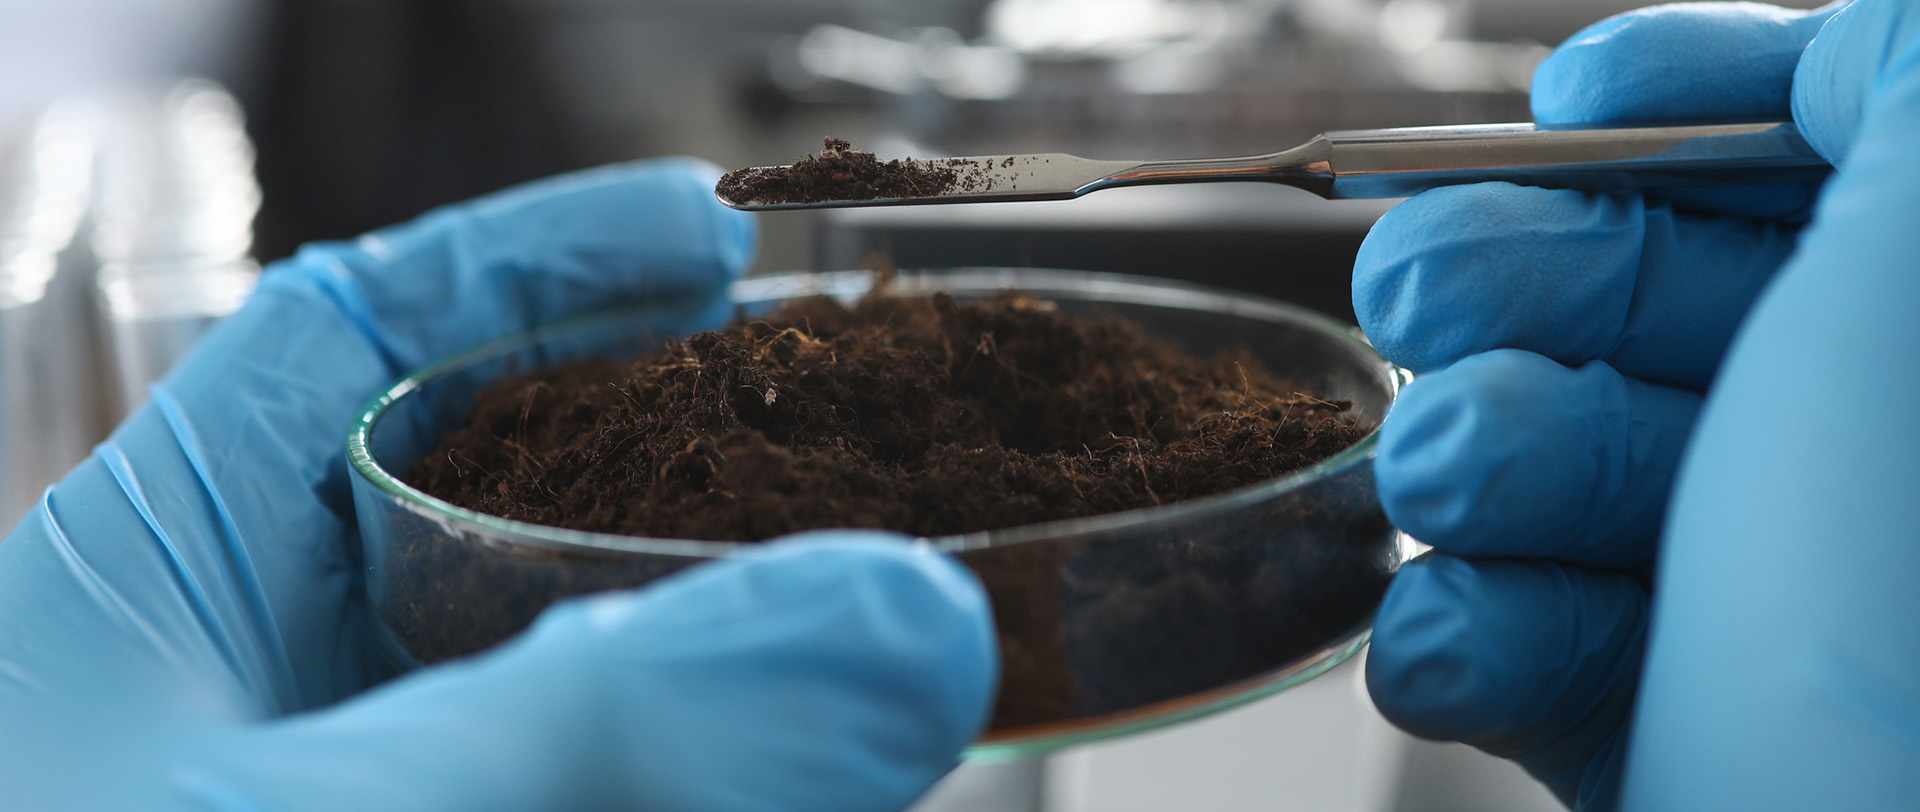 Scientist wearing protective gloves examining a soil sample from a petri dish